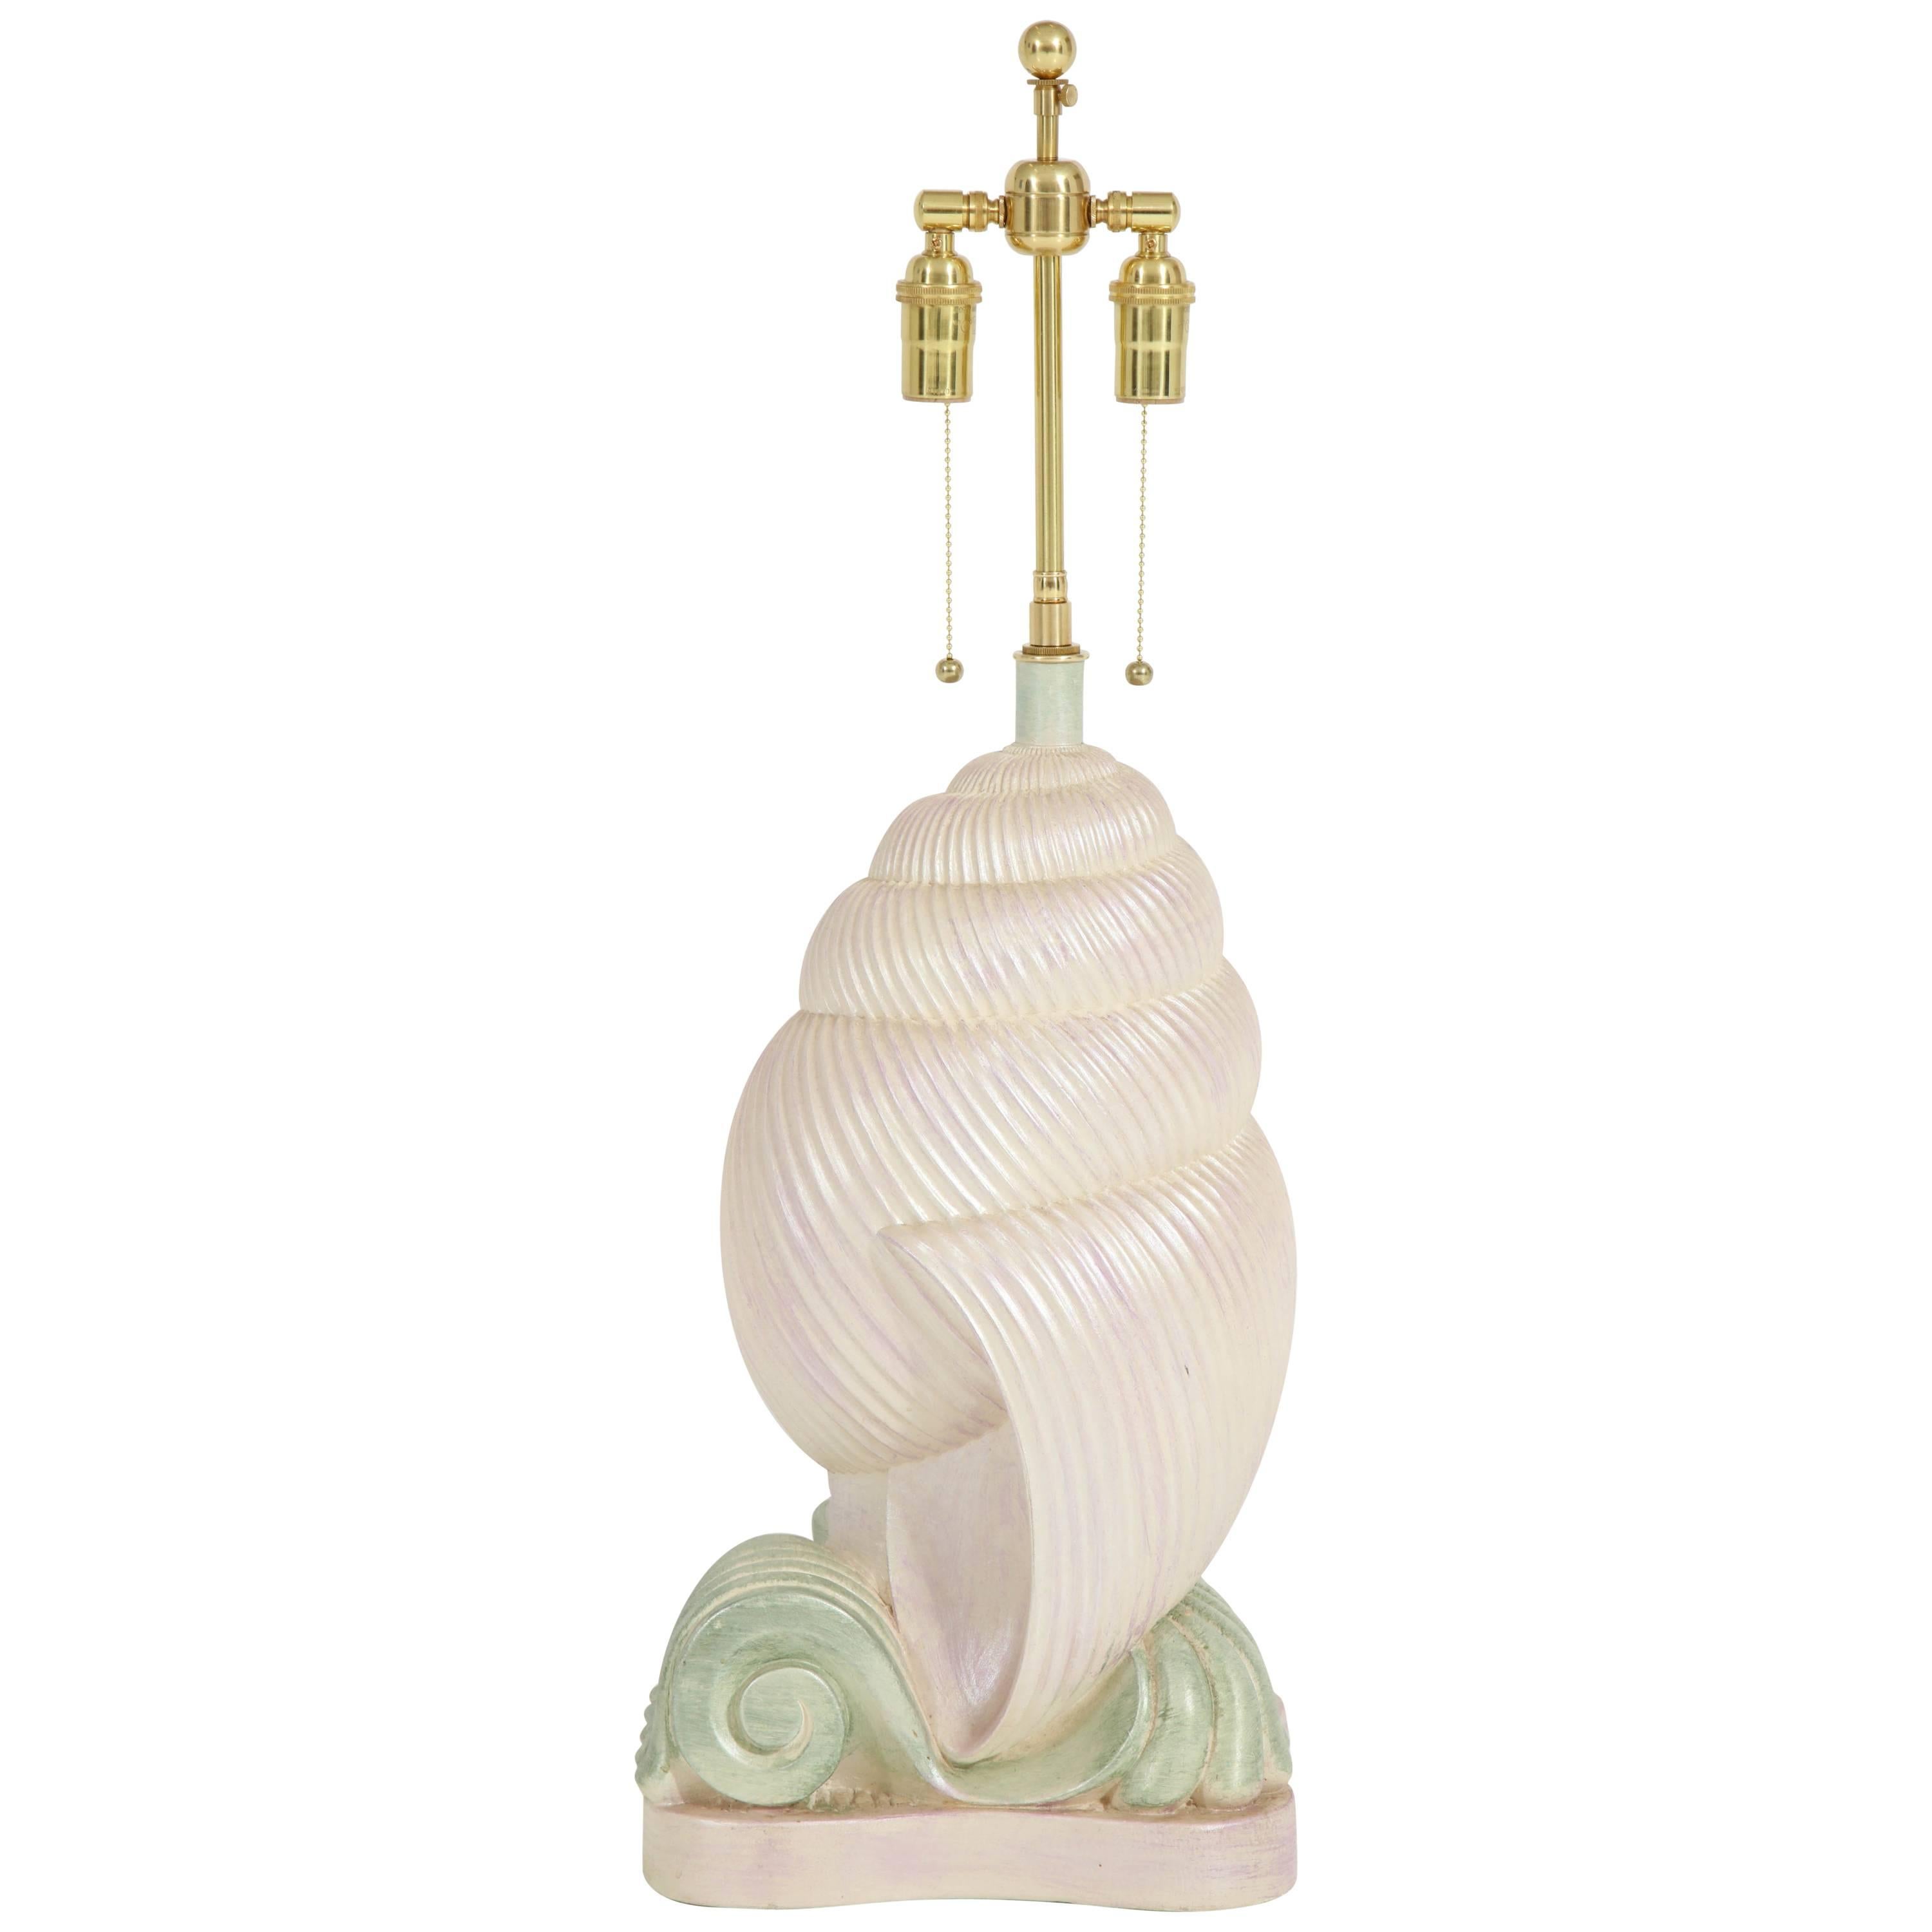 1980s Plaster Conch Shell Lamp